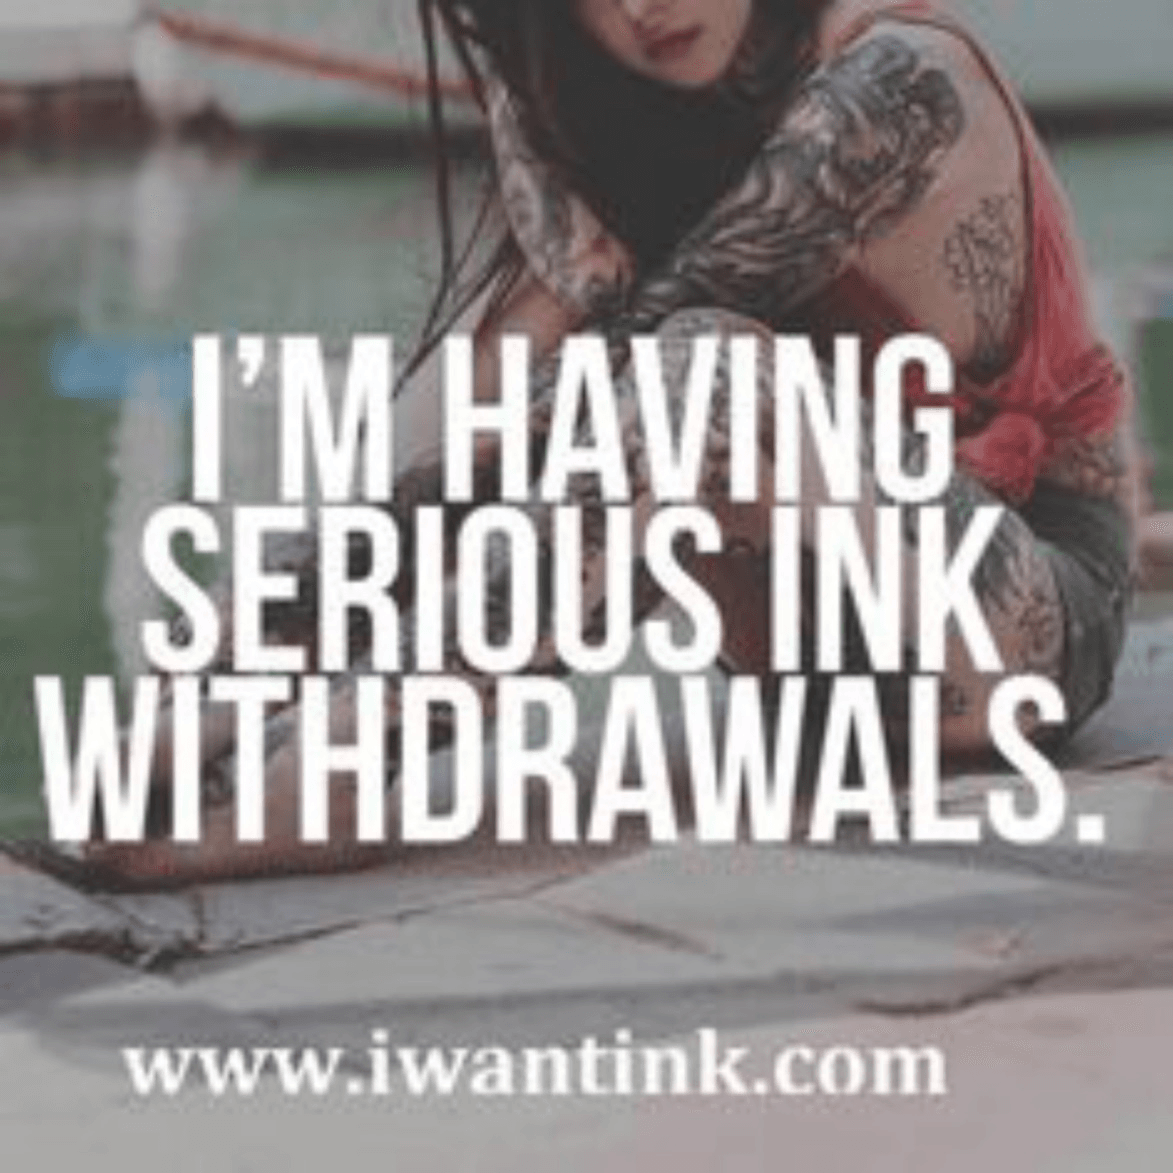 If only people would see it that way   Tattoo memes Tattoo quotes  Funny tattoos